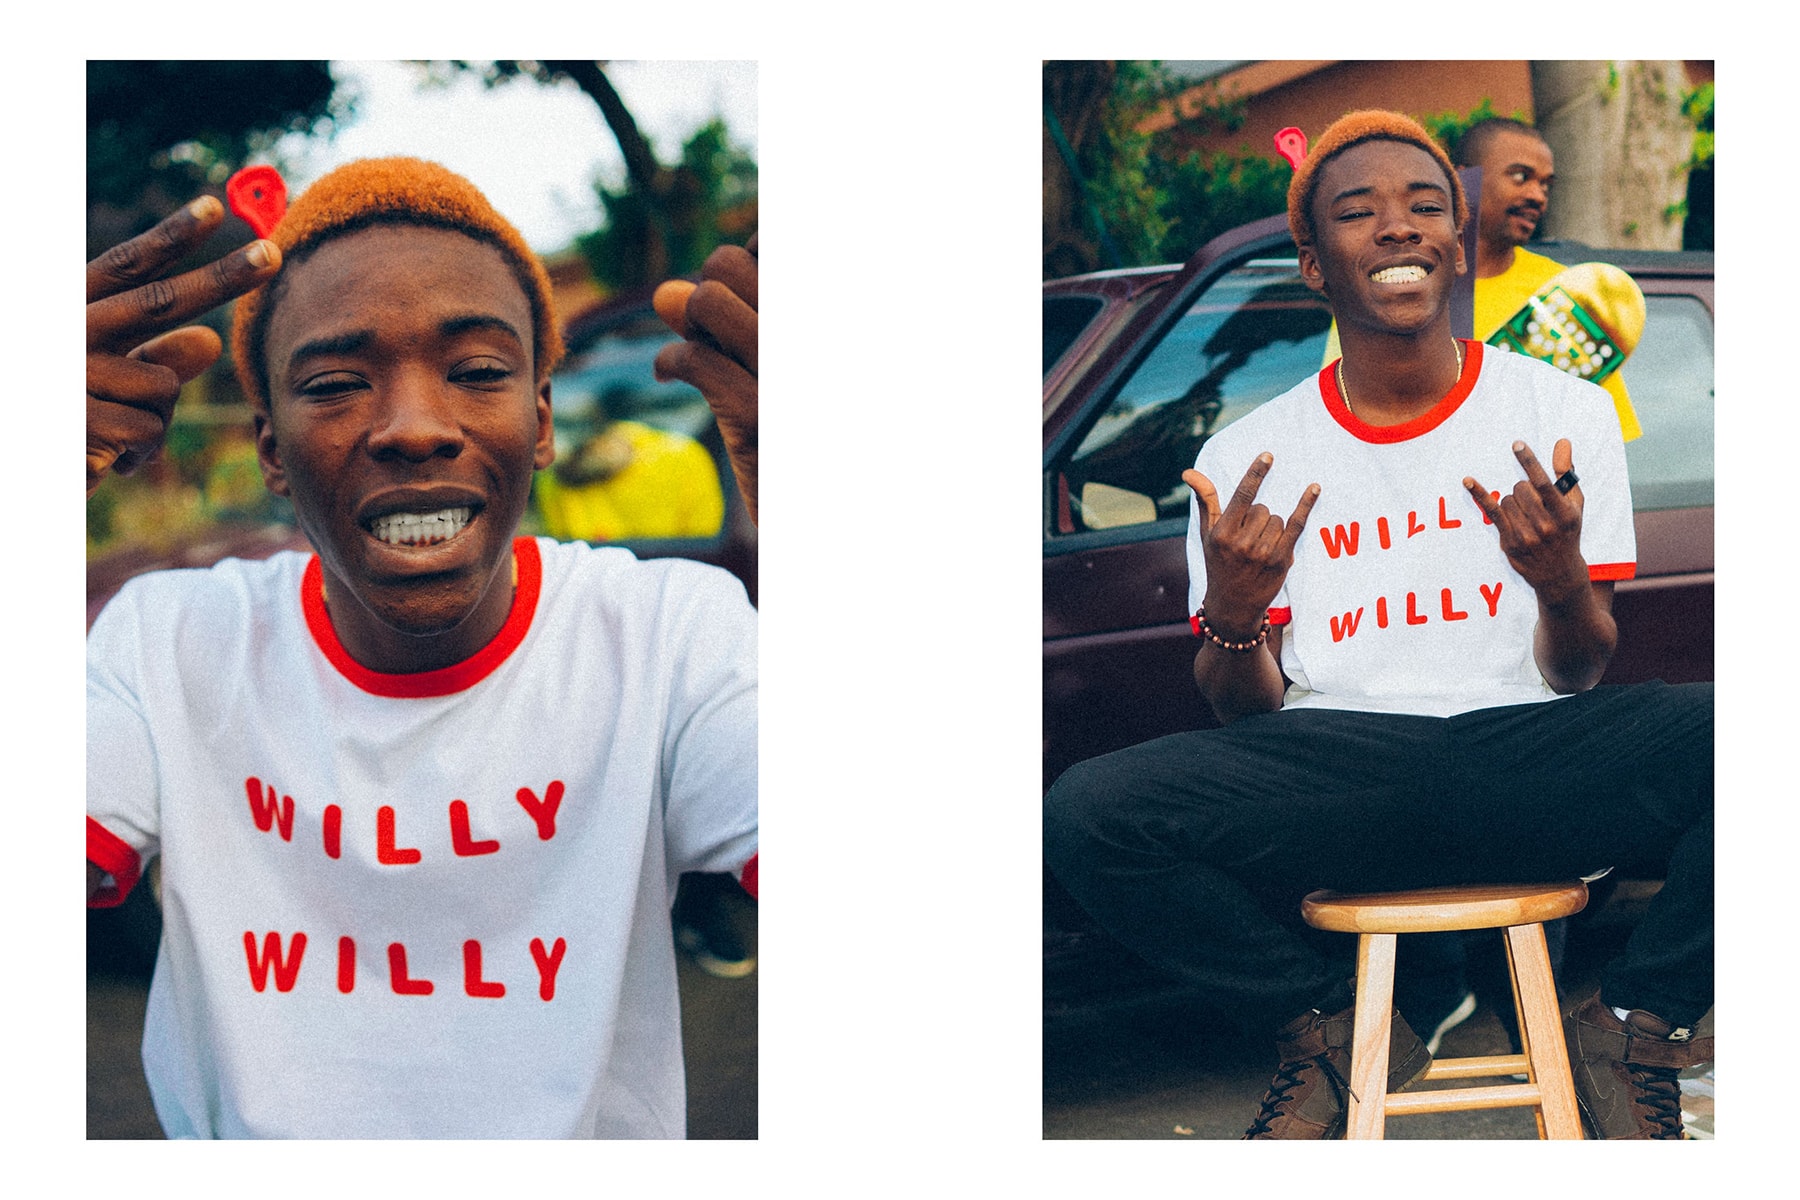 BROCKHAMPTON lookbook spring summer 2018 collection drop release shirts water bottles backpacks branding logo gay factory all american boyband willy records april 2 info date